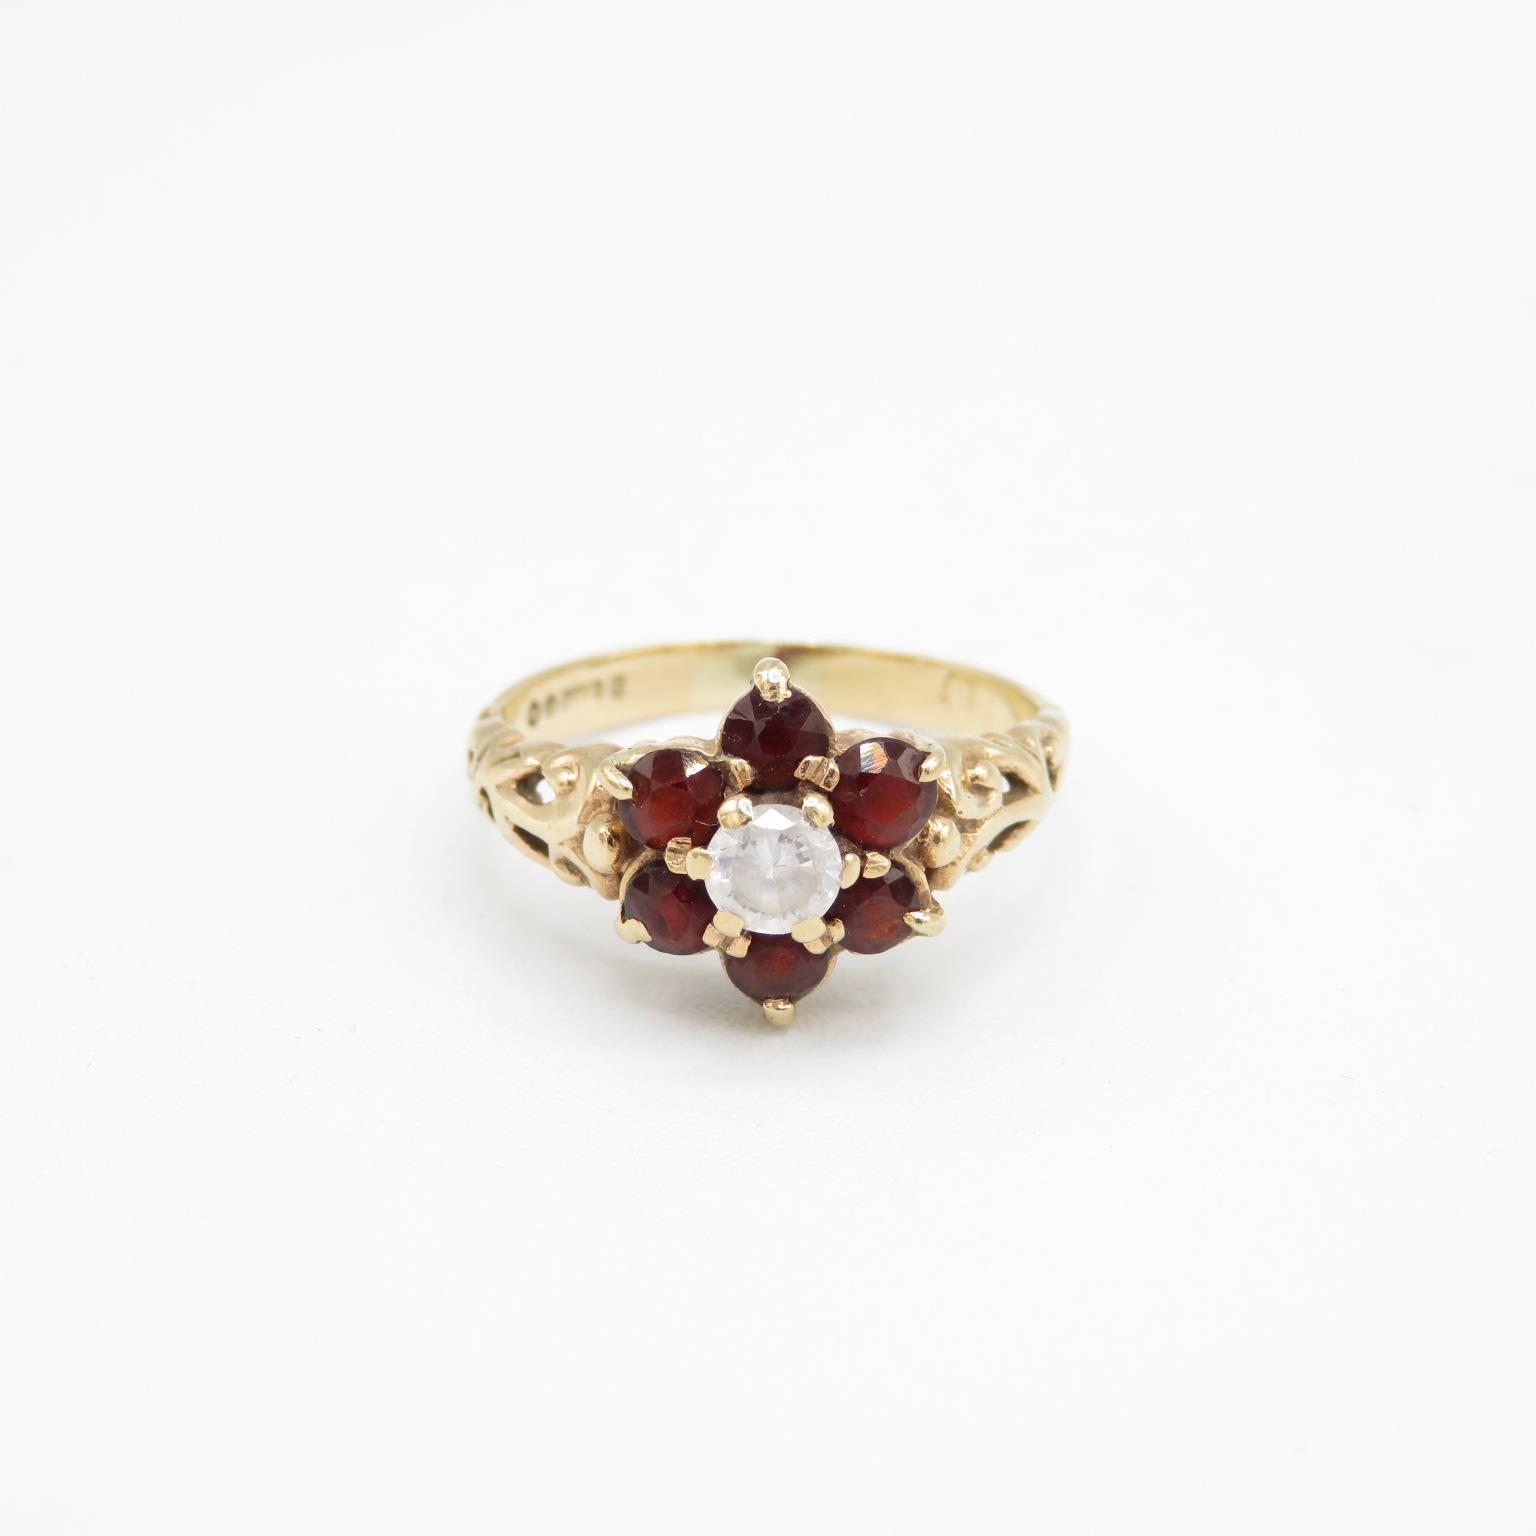 9ct gold 1970's garnet & cubic zirconia cluster ring Size N - 2.6 g